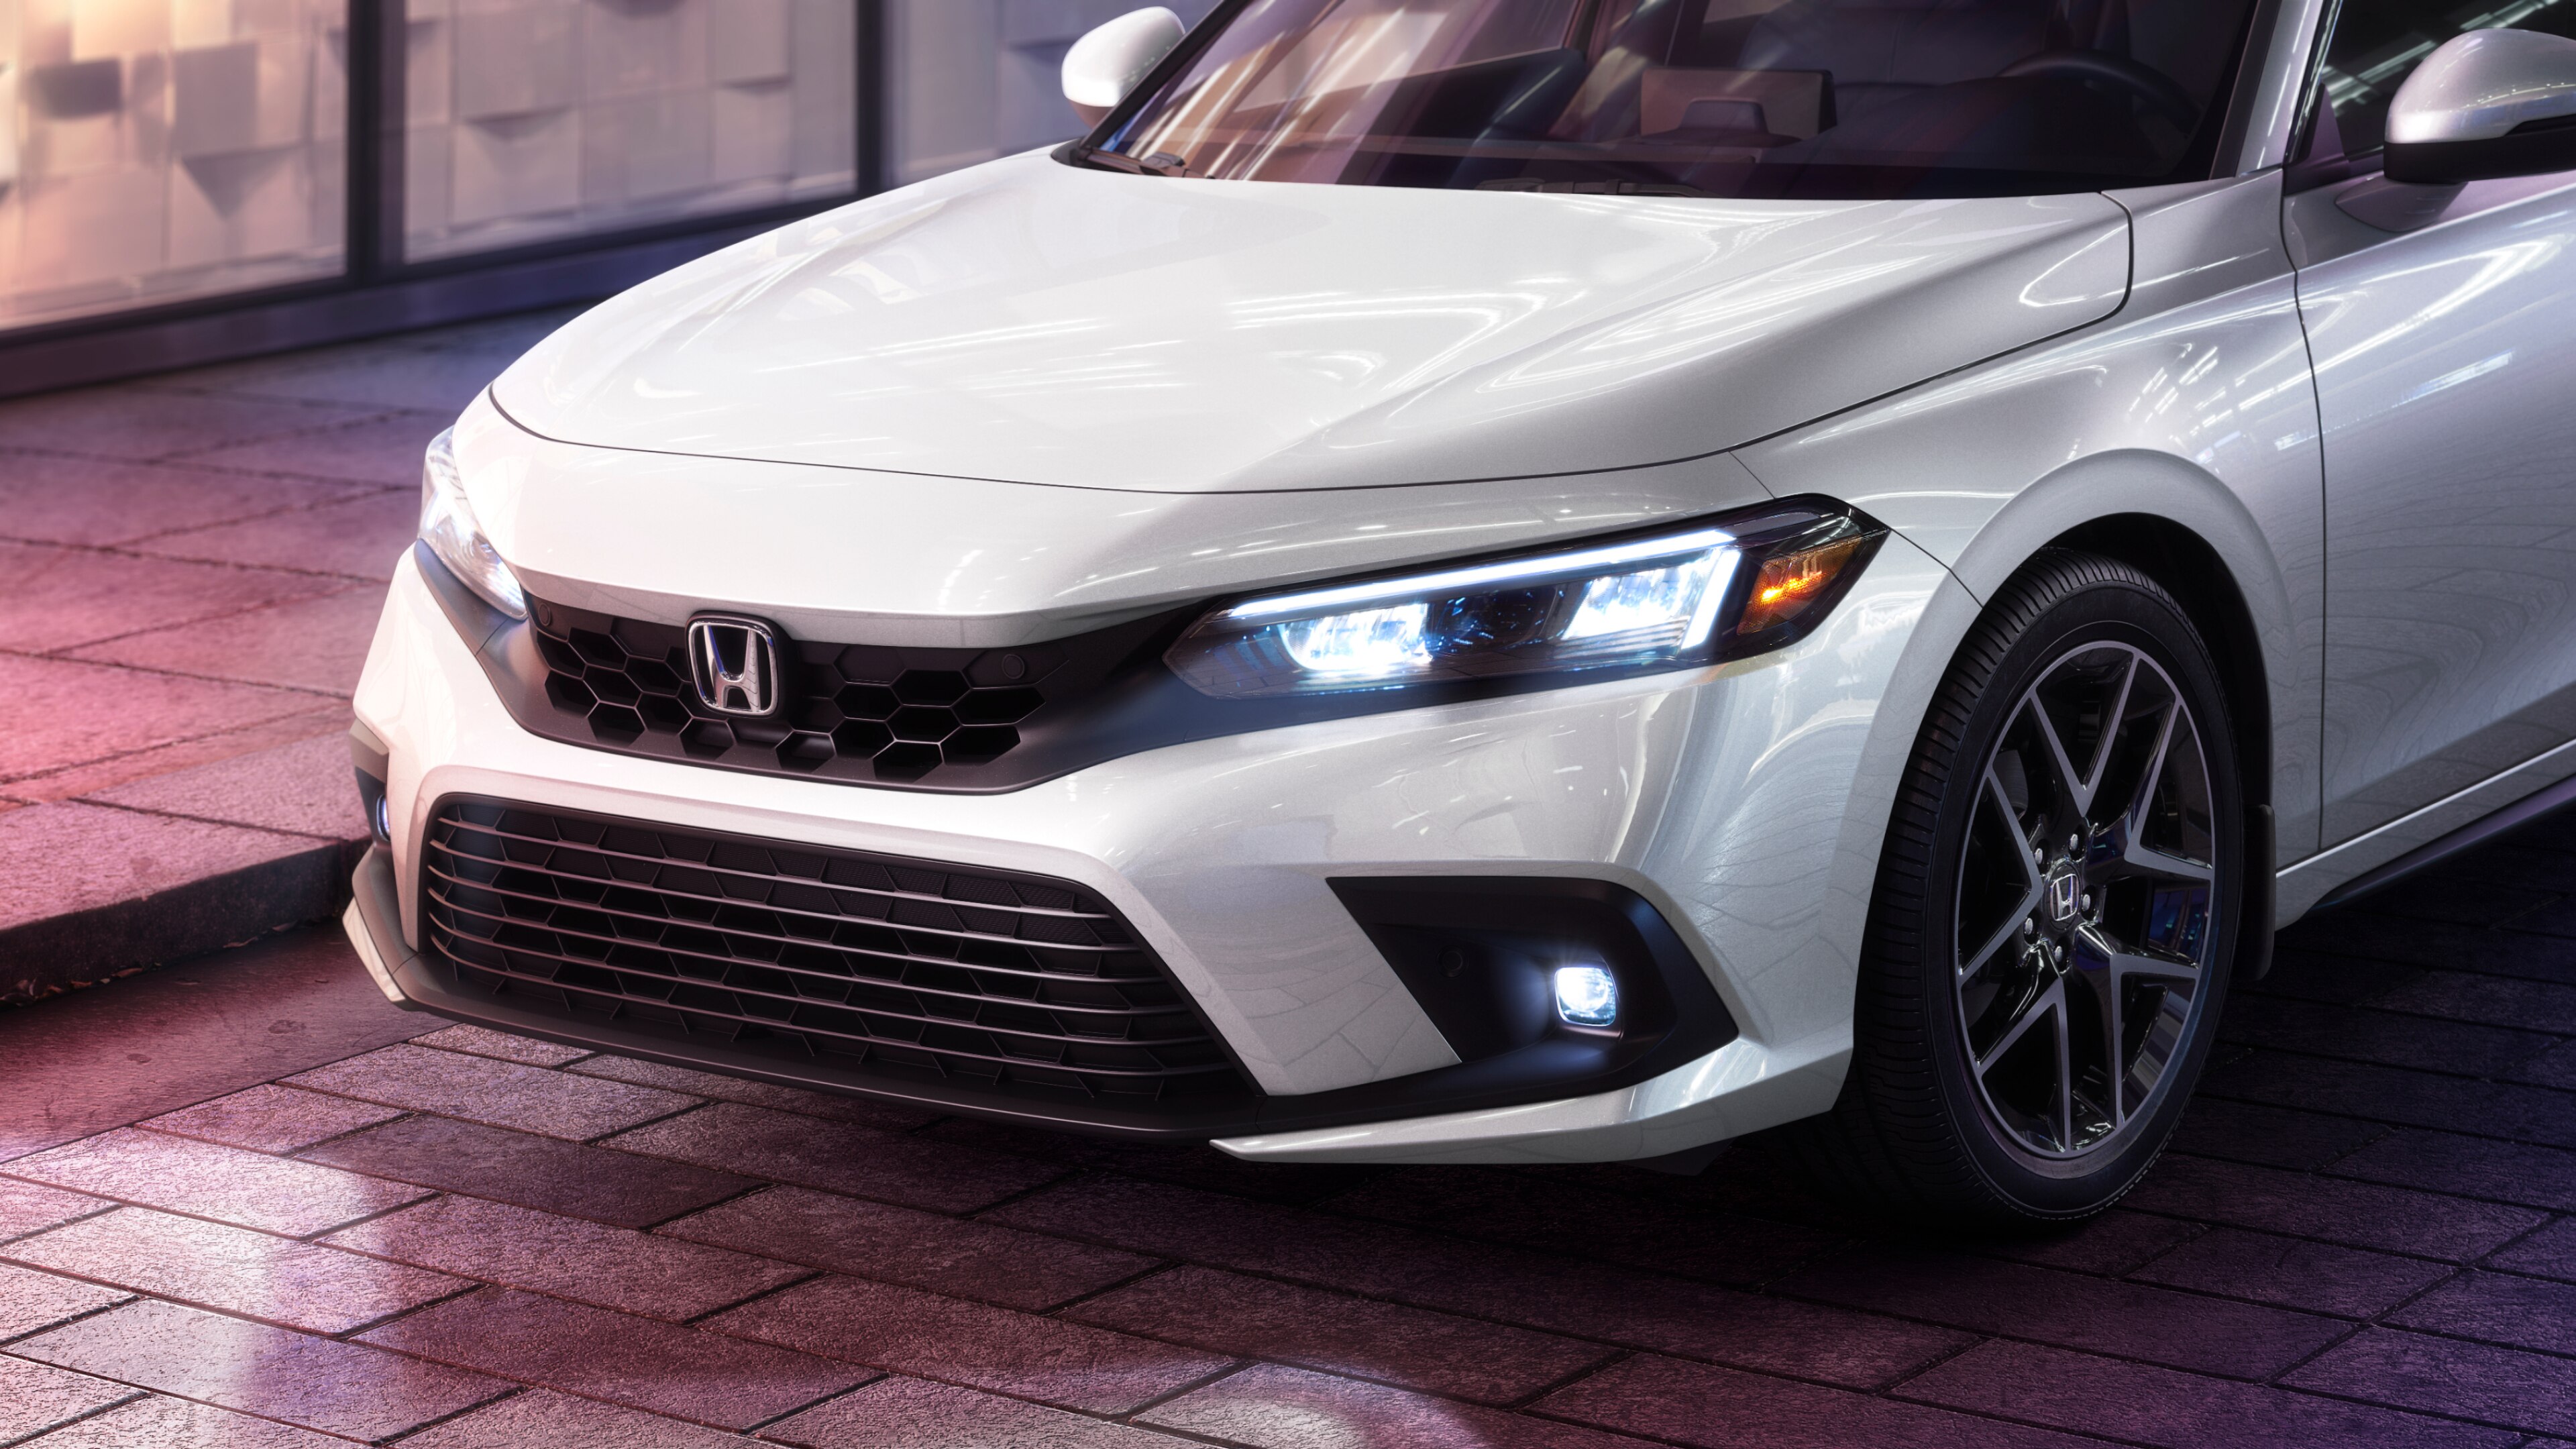 Side-angled close-up of white Honda Civic Hatchback with headlights shining on a brick road